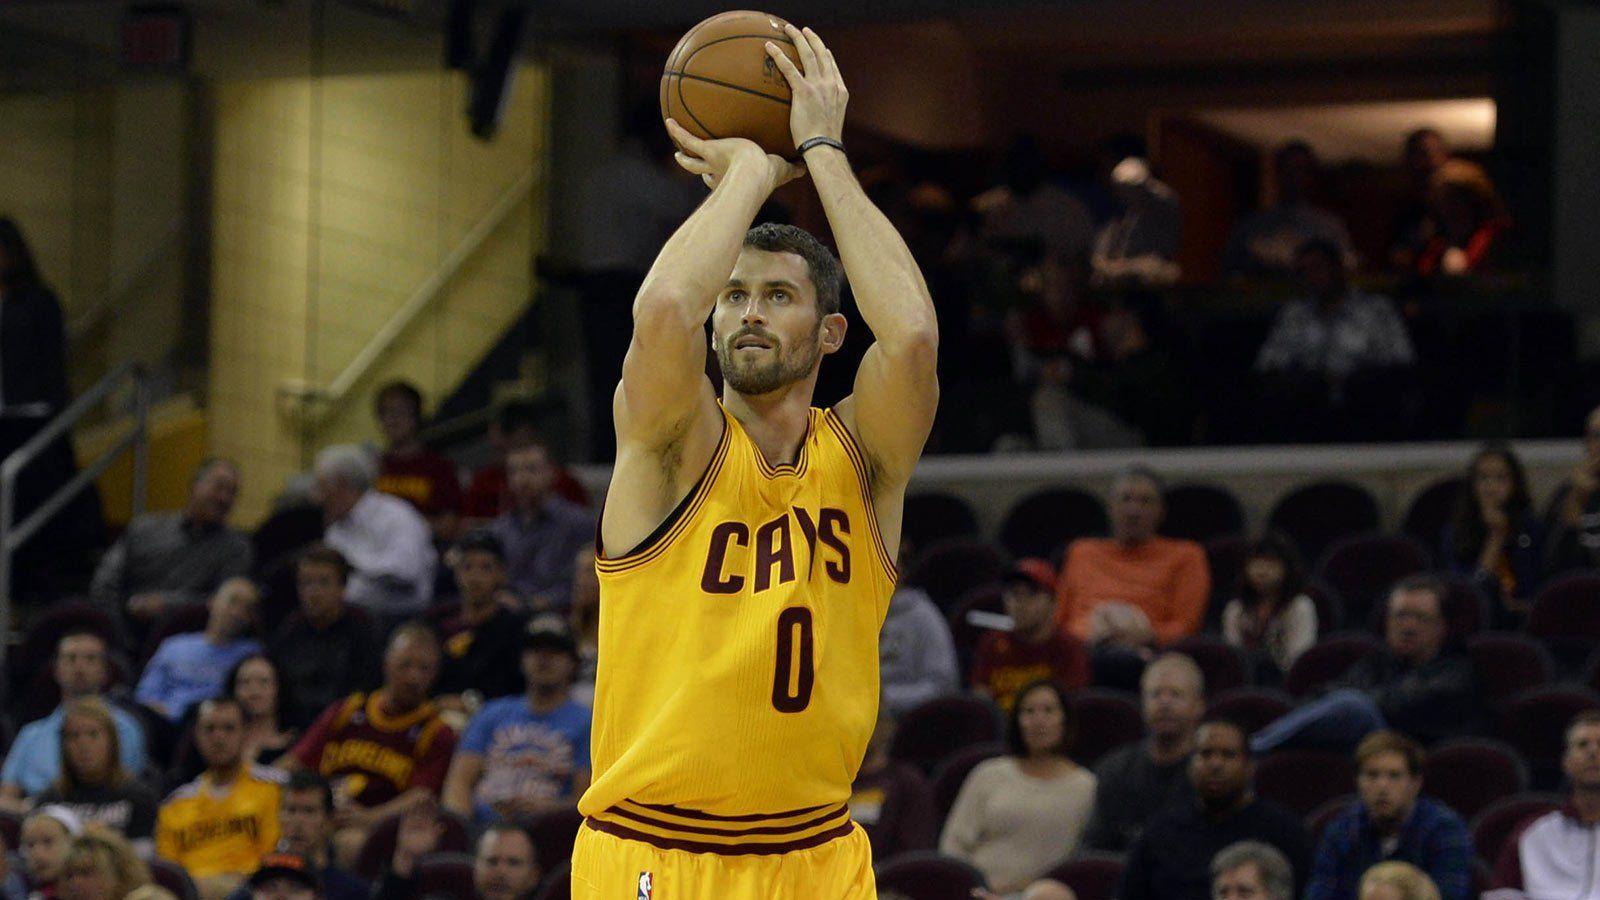 Download Kevin Love 2015 Wallpaper Phone #uqw8t hdxwallpaperz.com